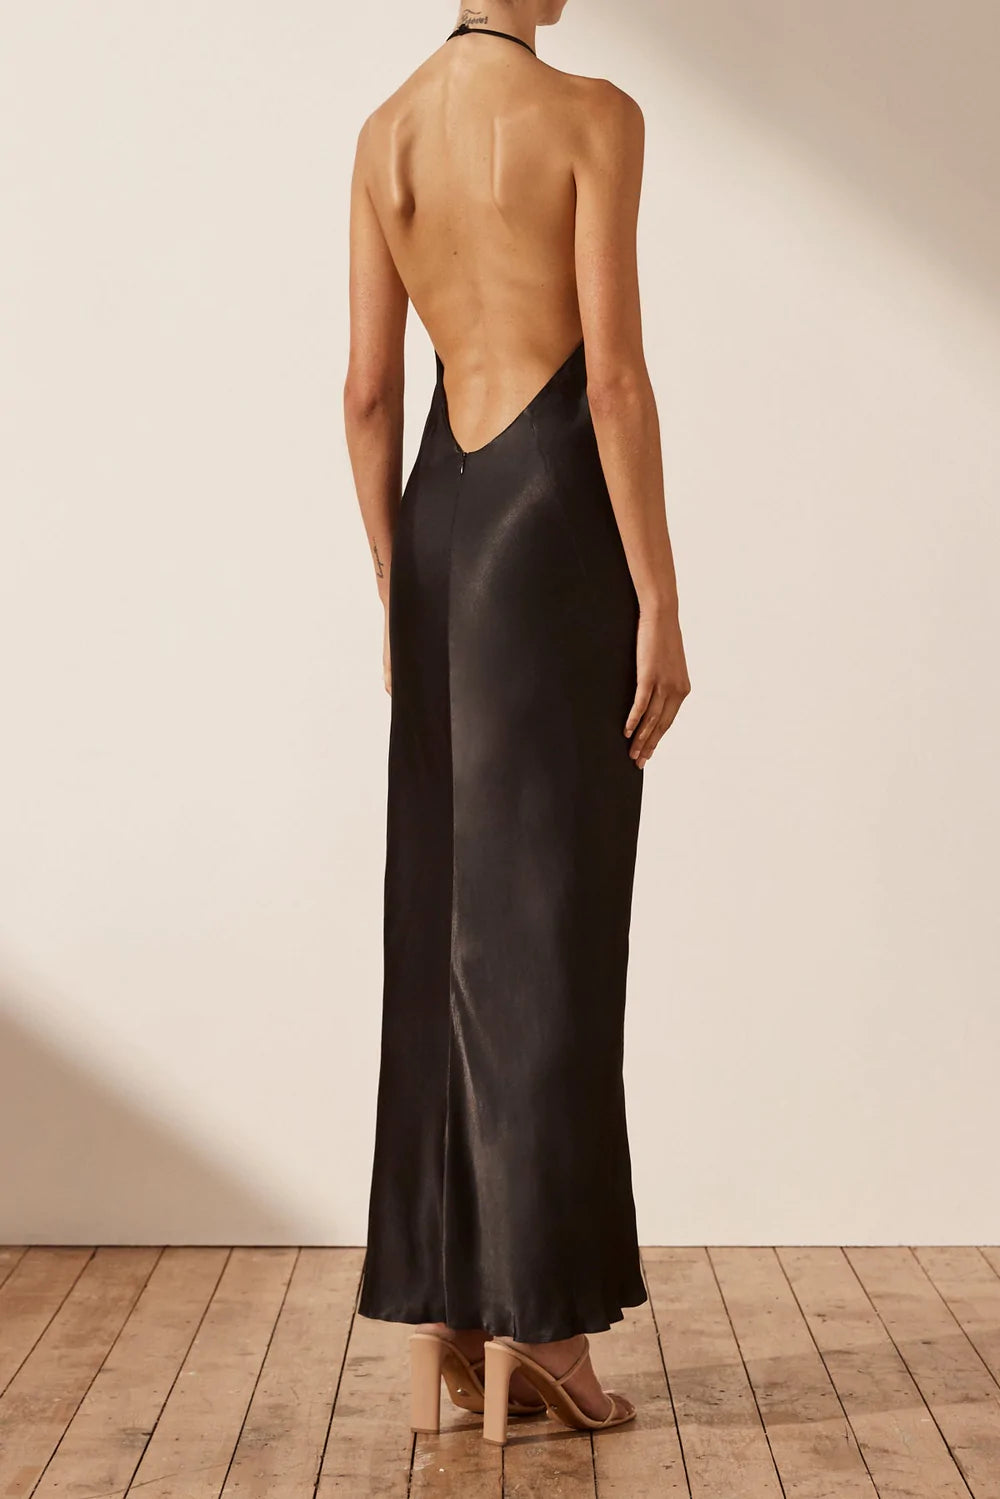 Backless Dresses - Low Back, Tie Back & Open Back Dresses | Oh Polly US